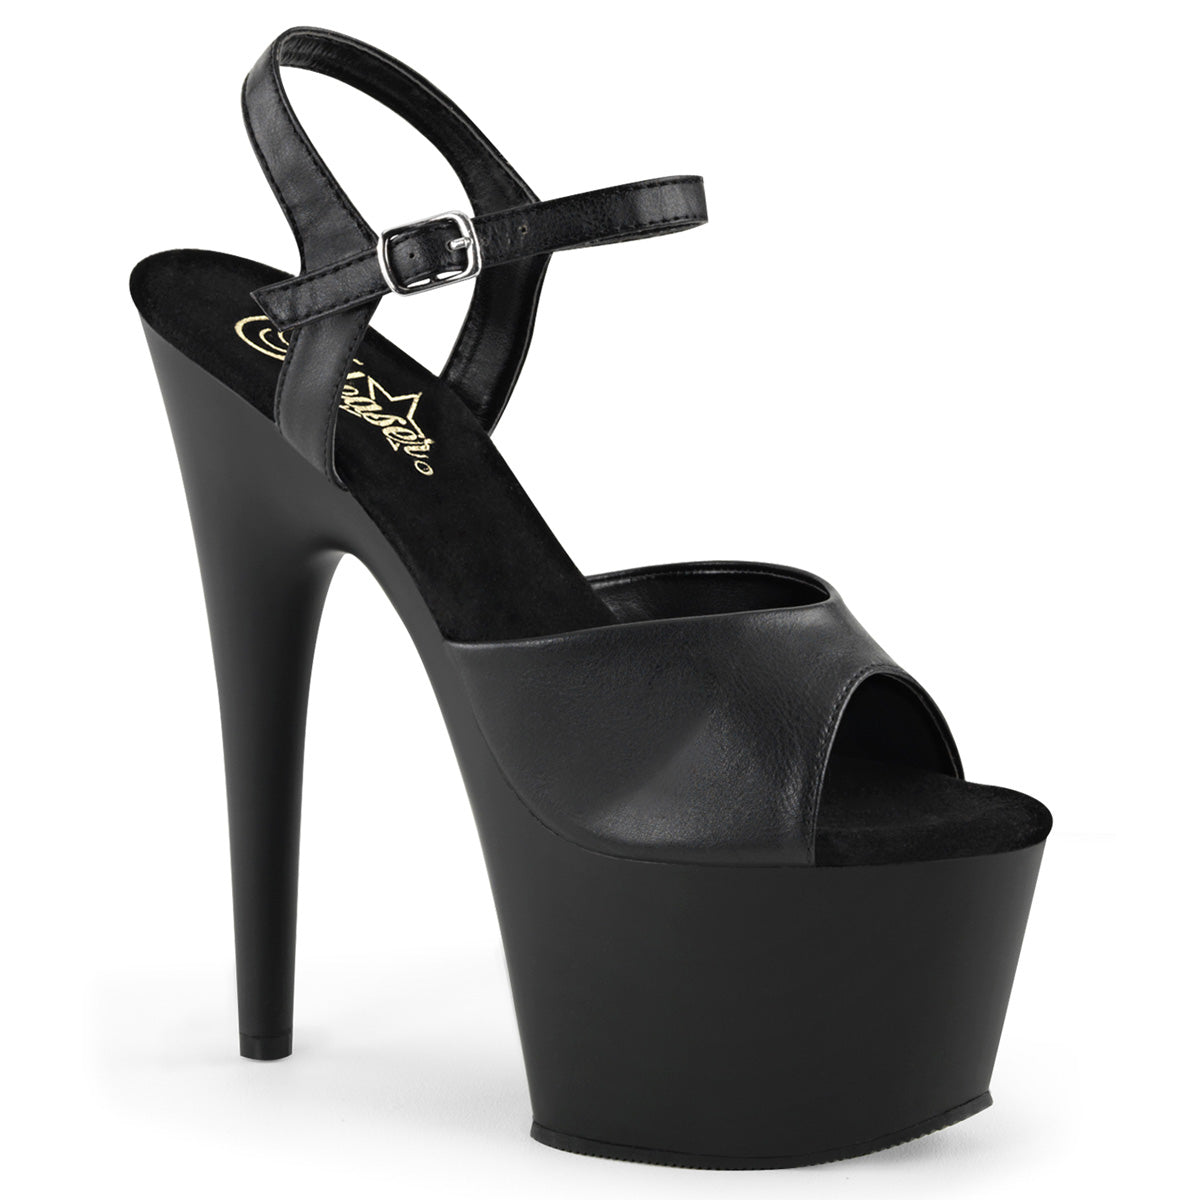 ADORE-709 Pleasers 7 Inch Heel Black Pole Dancing Platforms-Pleaser- Sexy Shoes